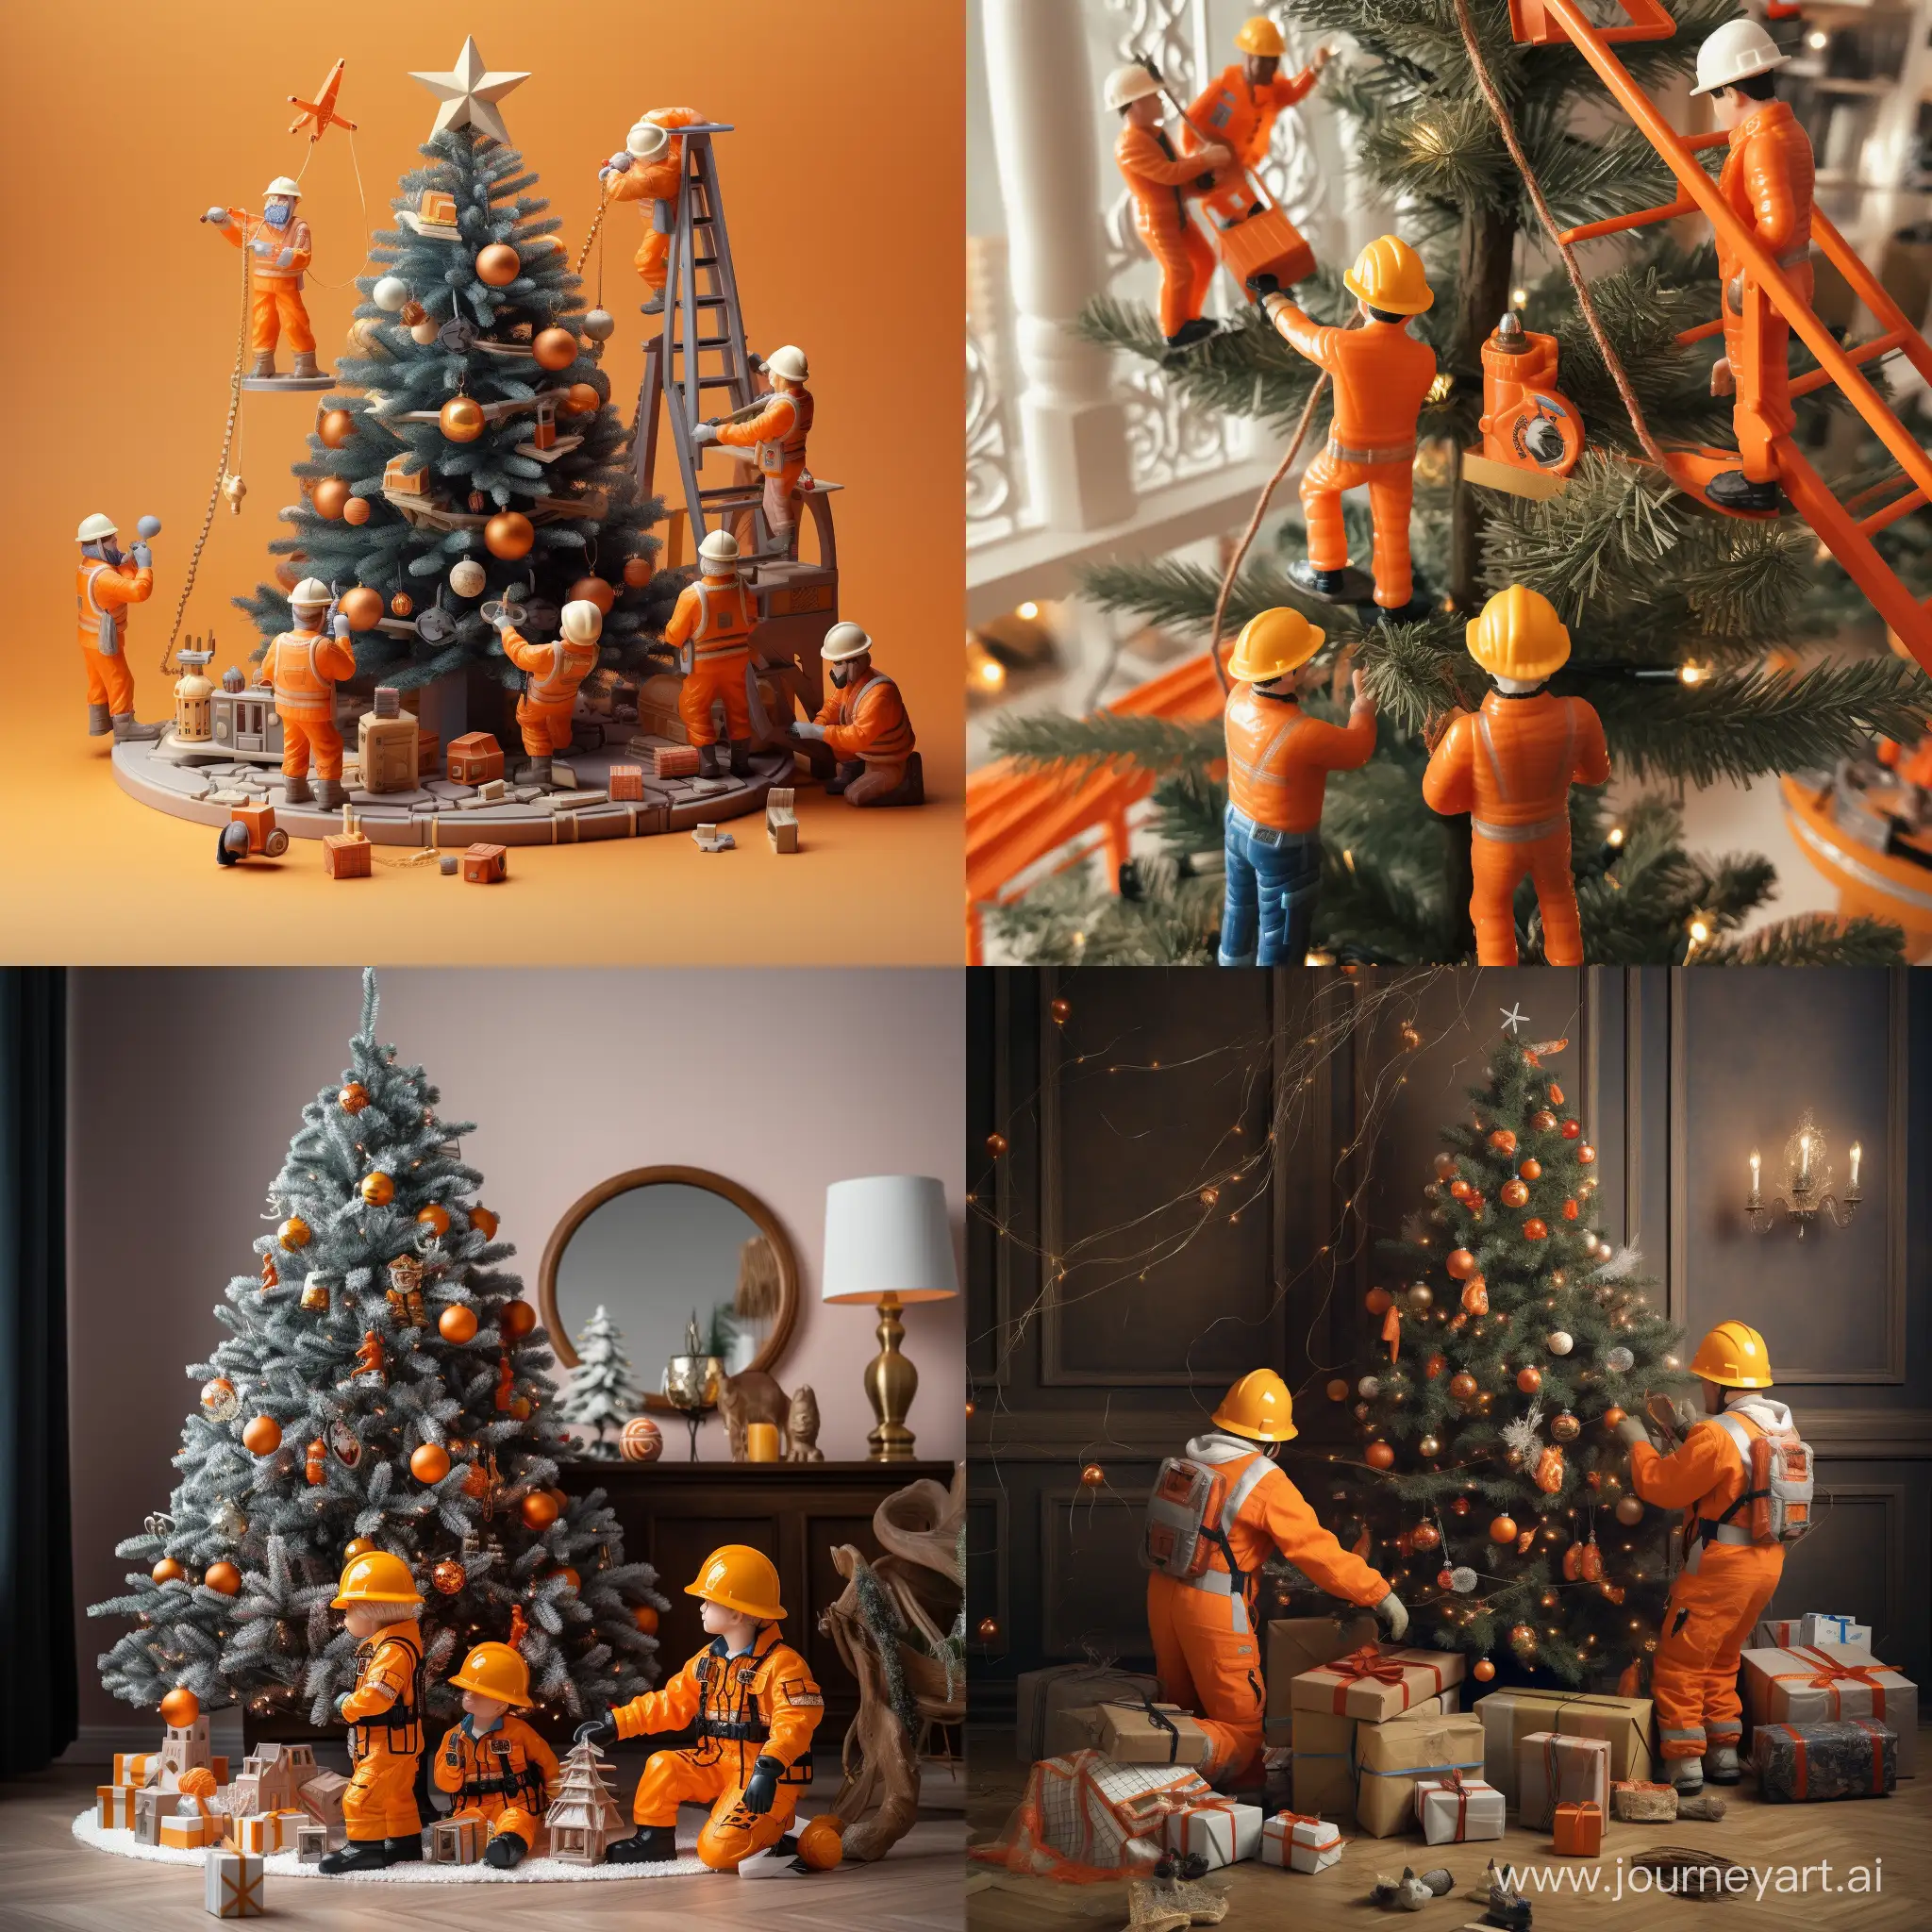 Festive-New-Year-Tree-Decoration-by-Construction-Workers-in-Orange-Helmets